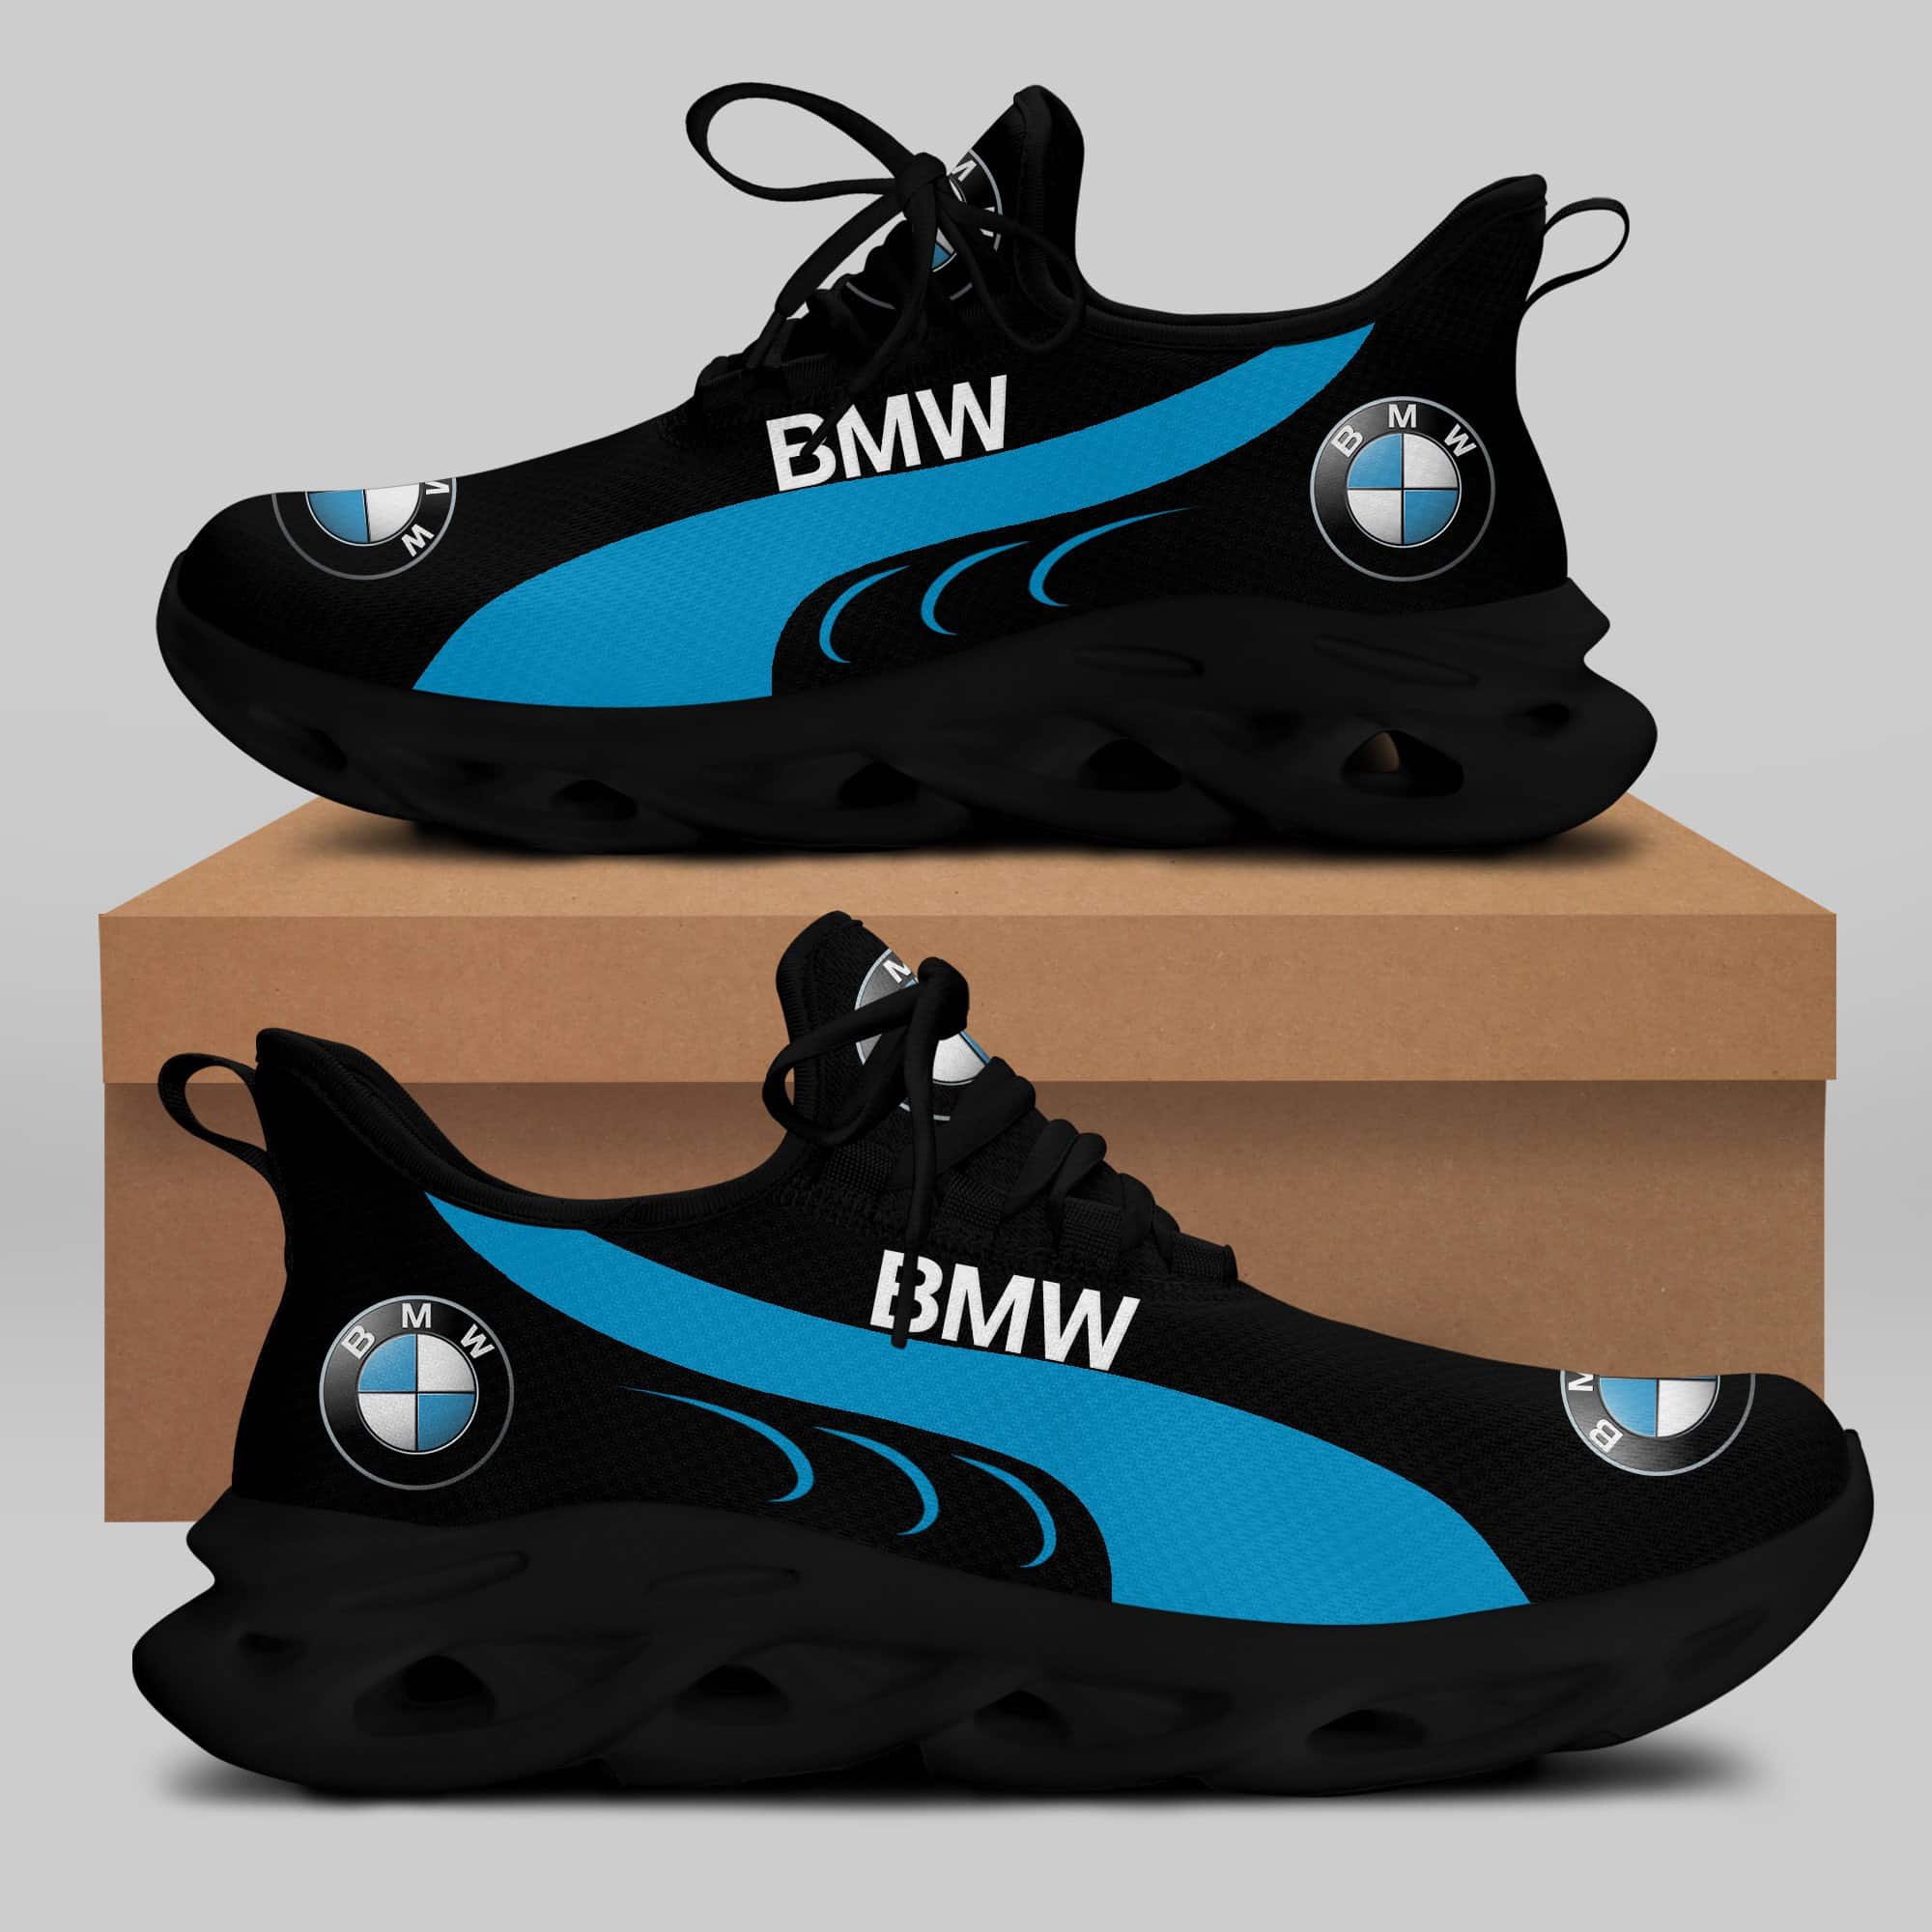 Bmw Running Shoes Max Soul Shoes Sneakers Ver 50 1